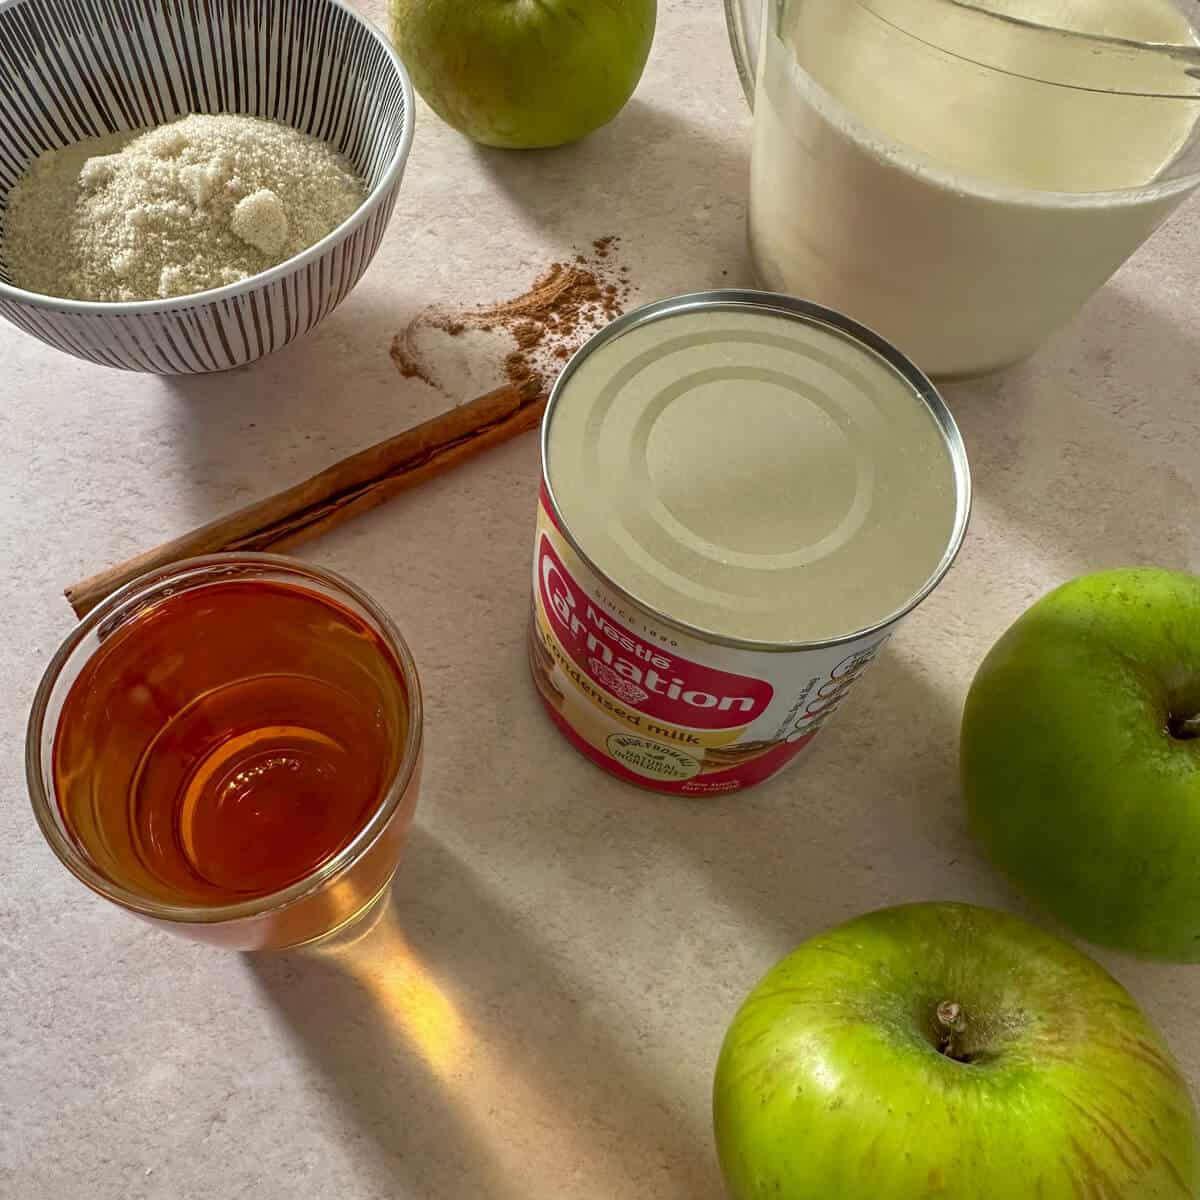 The ingredients for cinnamon bourbon apple ice cream on a table. Brown sugar, cream, bourbon, cinnamon, apples and sweetened condensed milk.